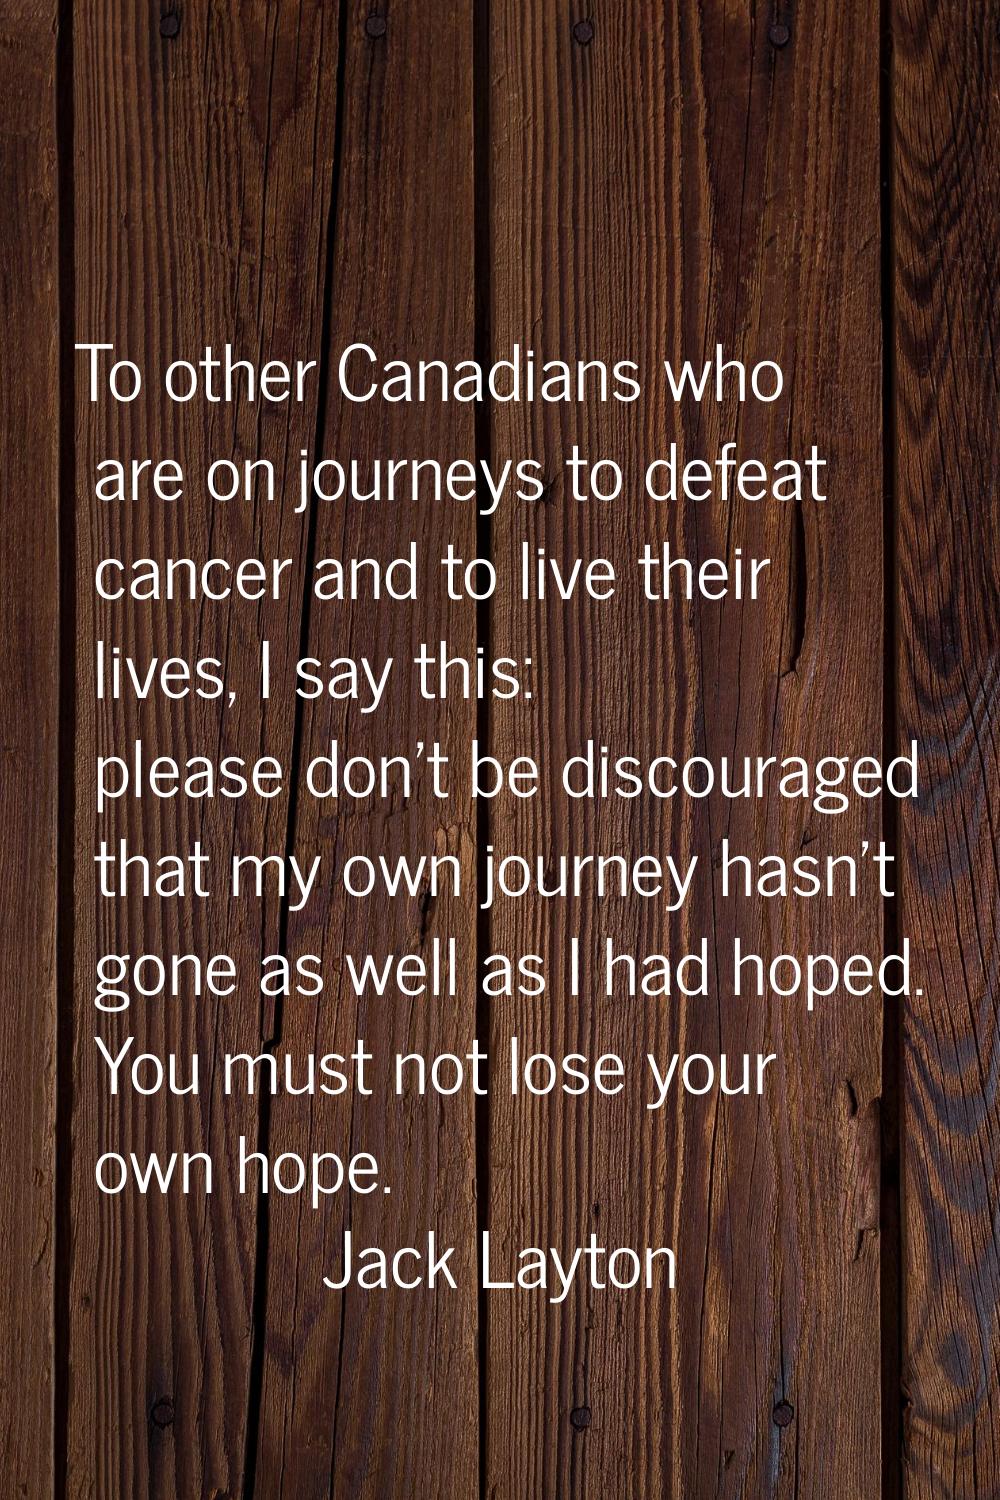 To other Canadians who are on journeys to defeat cancer and to live their lives, I say this: please